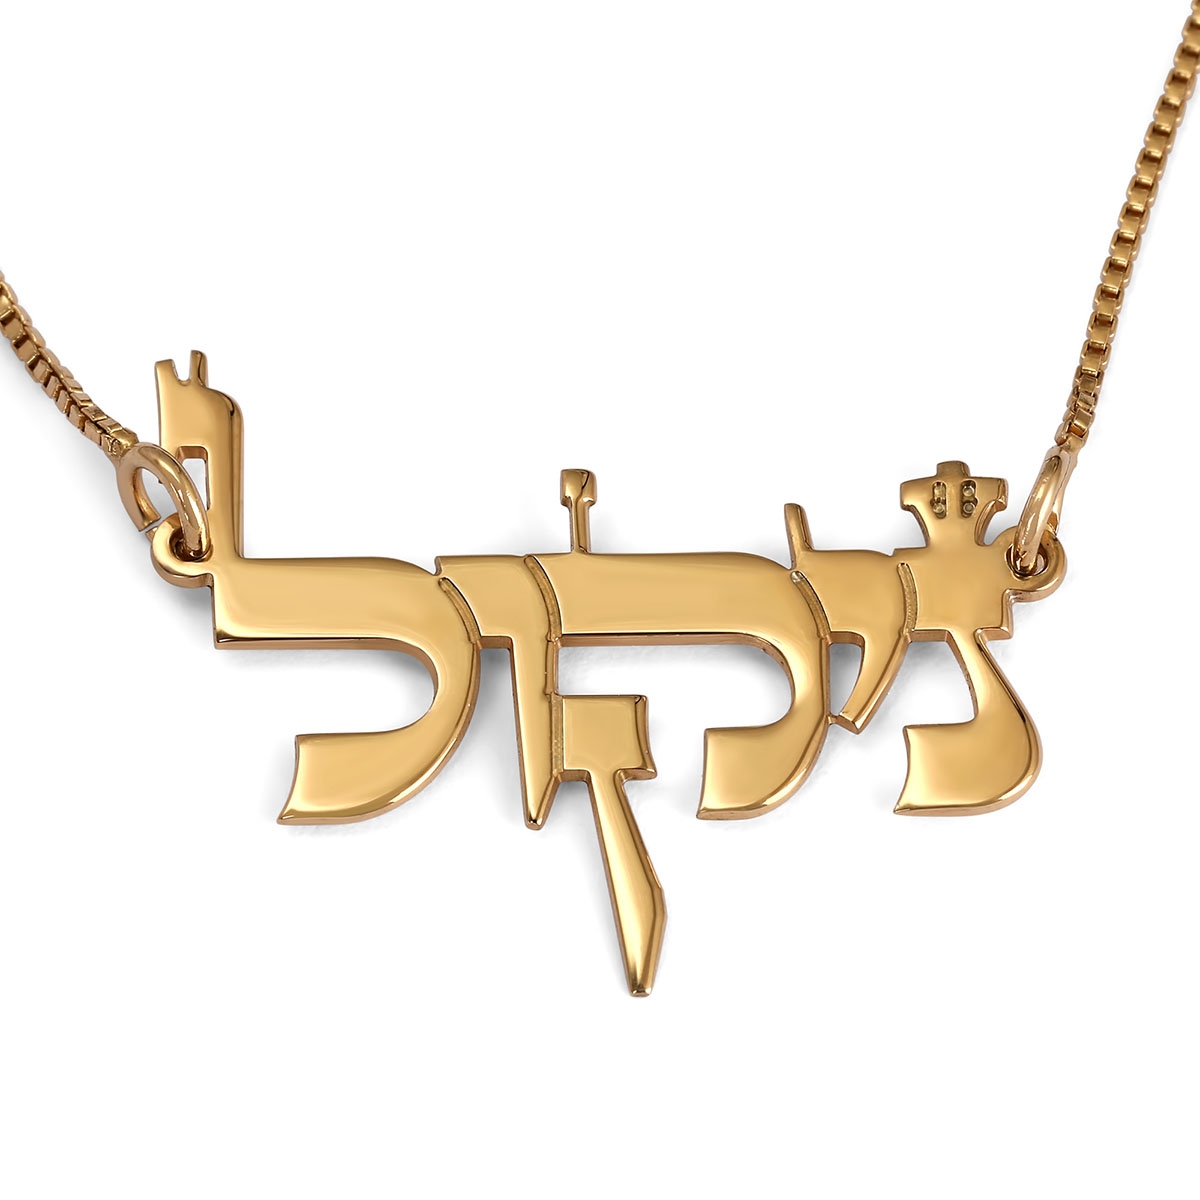 24K Gold-Plated Hebrew Name Necklace (Classic Biblical Script) - 1